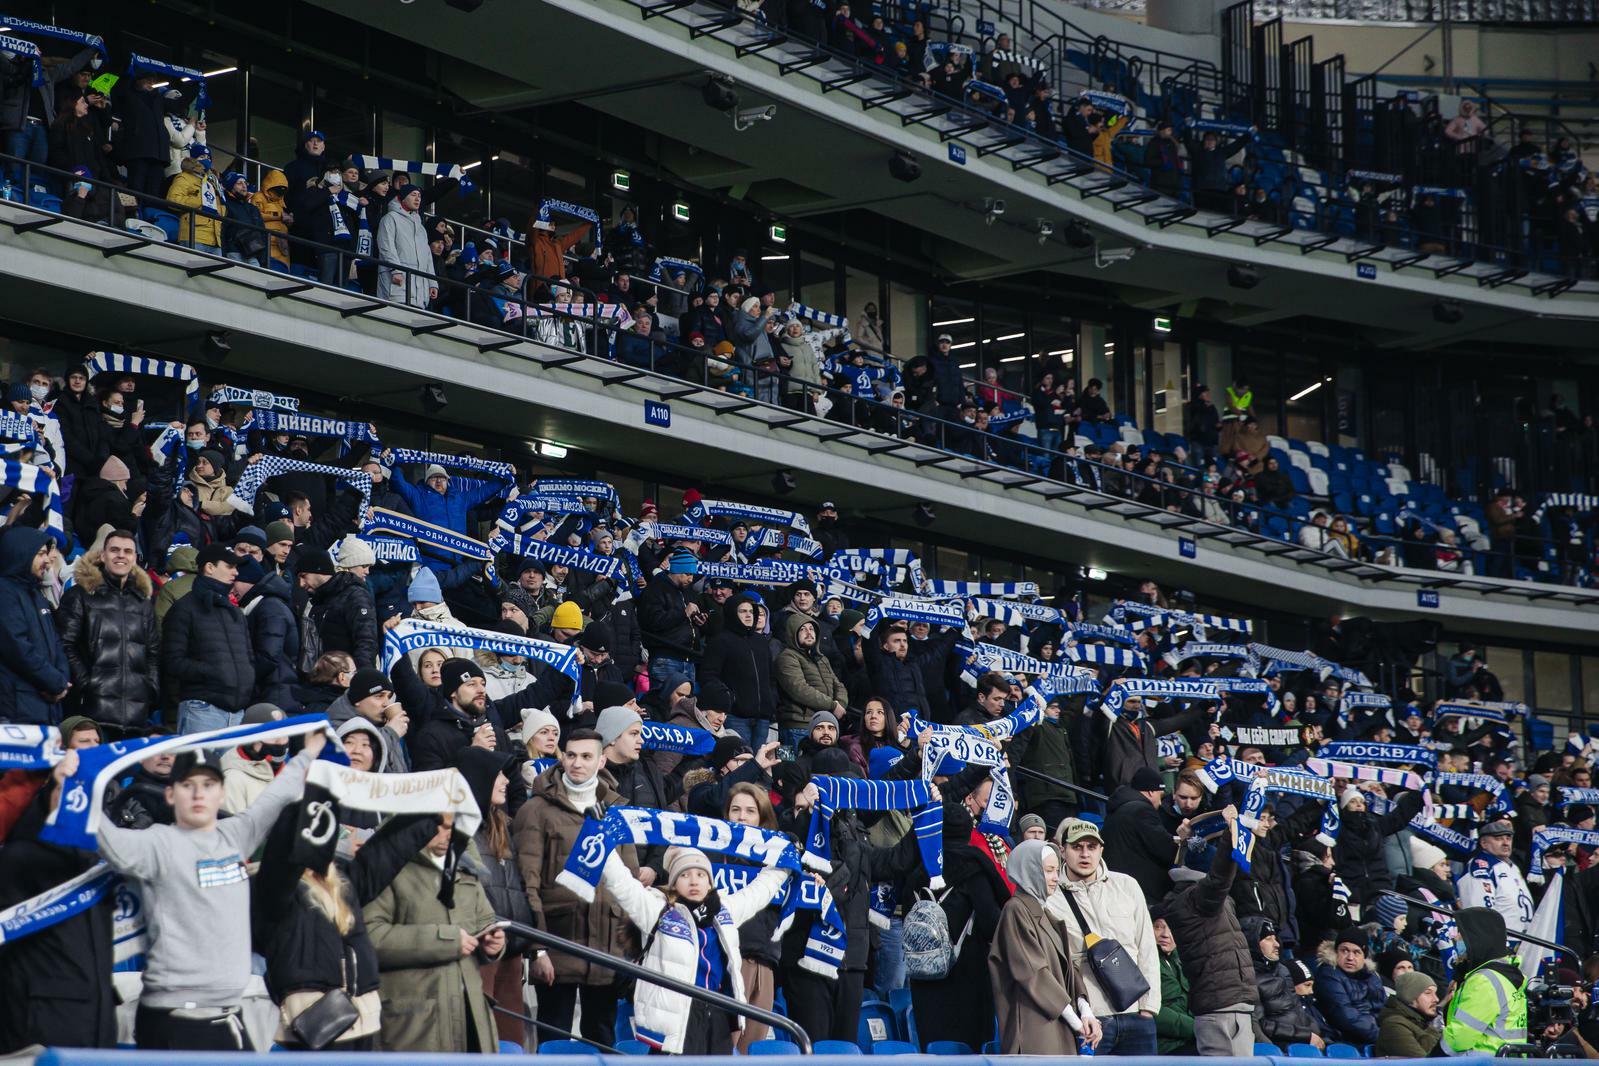 FC Dynamo Moscow News | Information for fans traveling to the cup match in Saint Petersburg. The official website of Dynamo club.